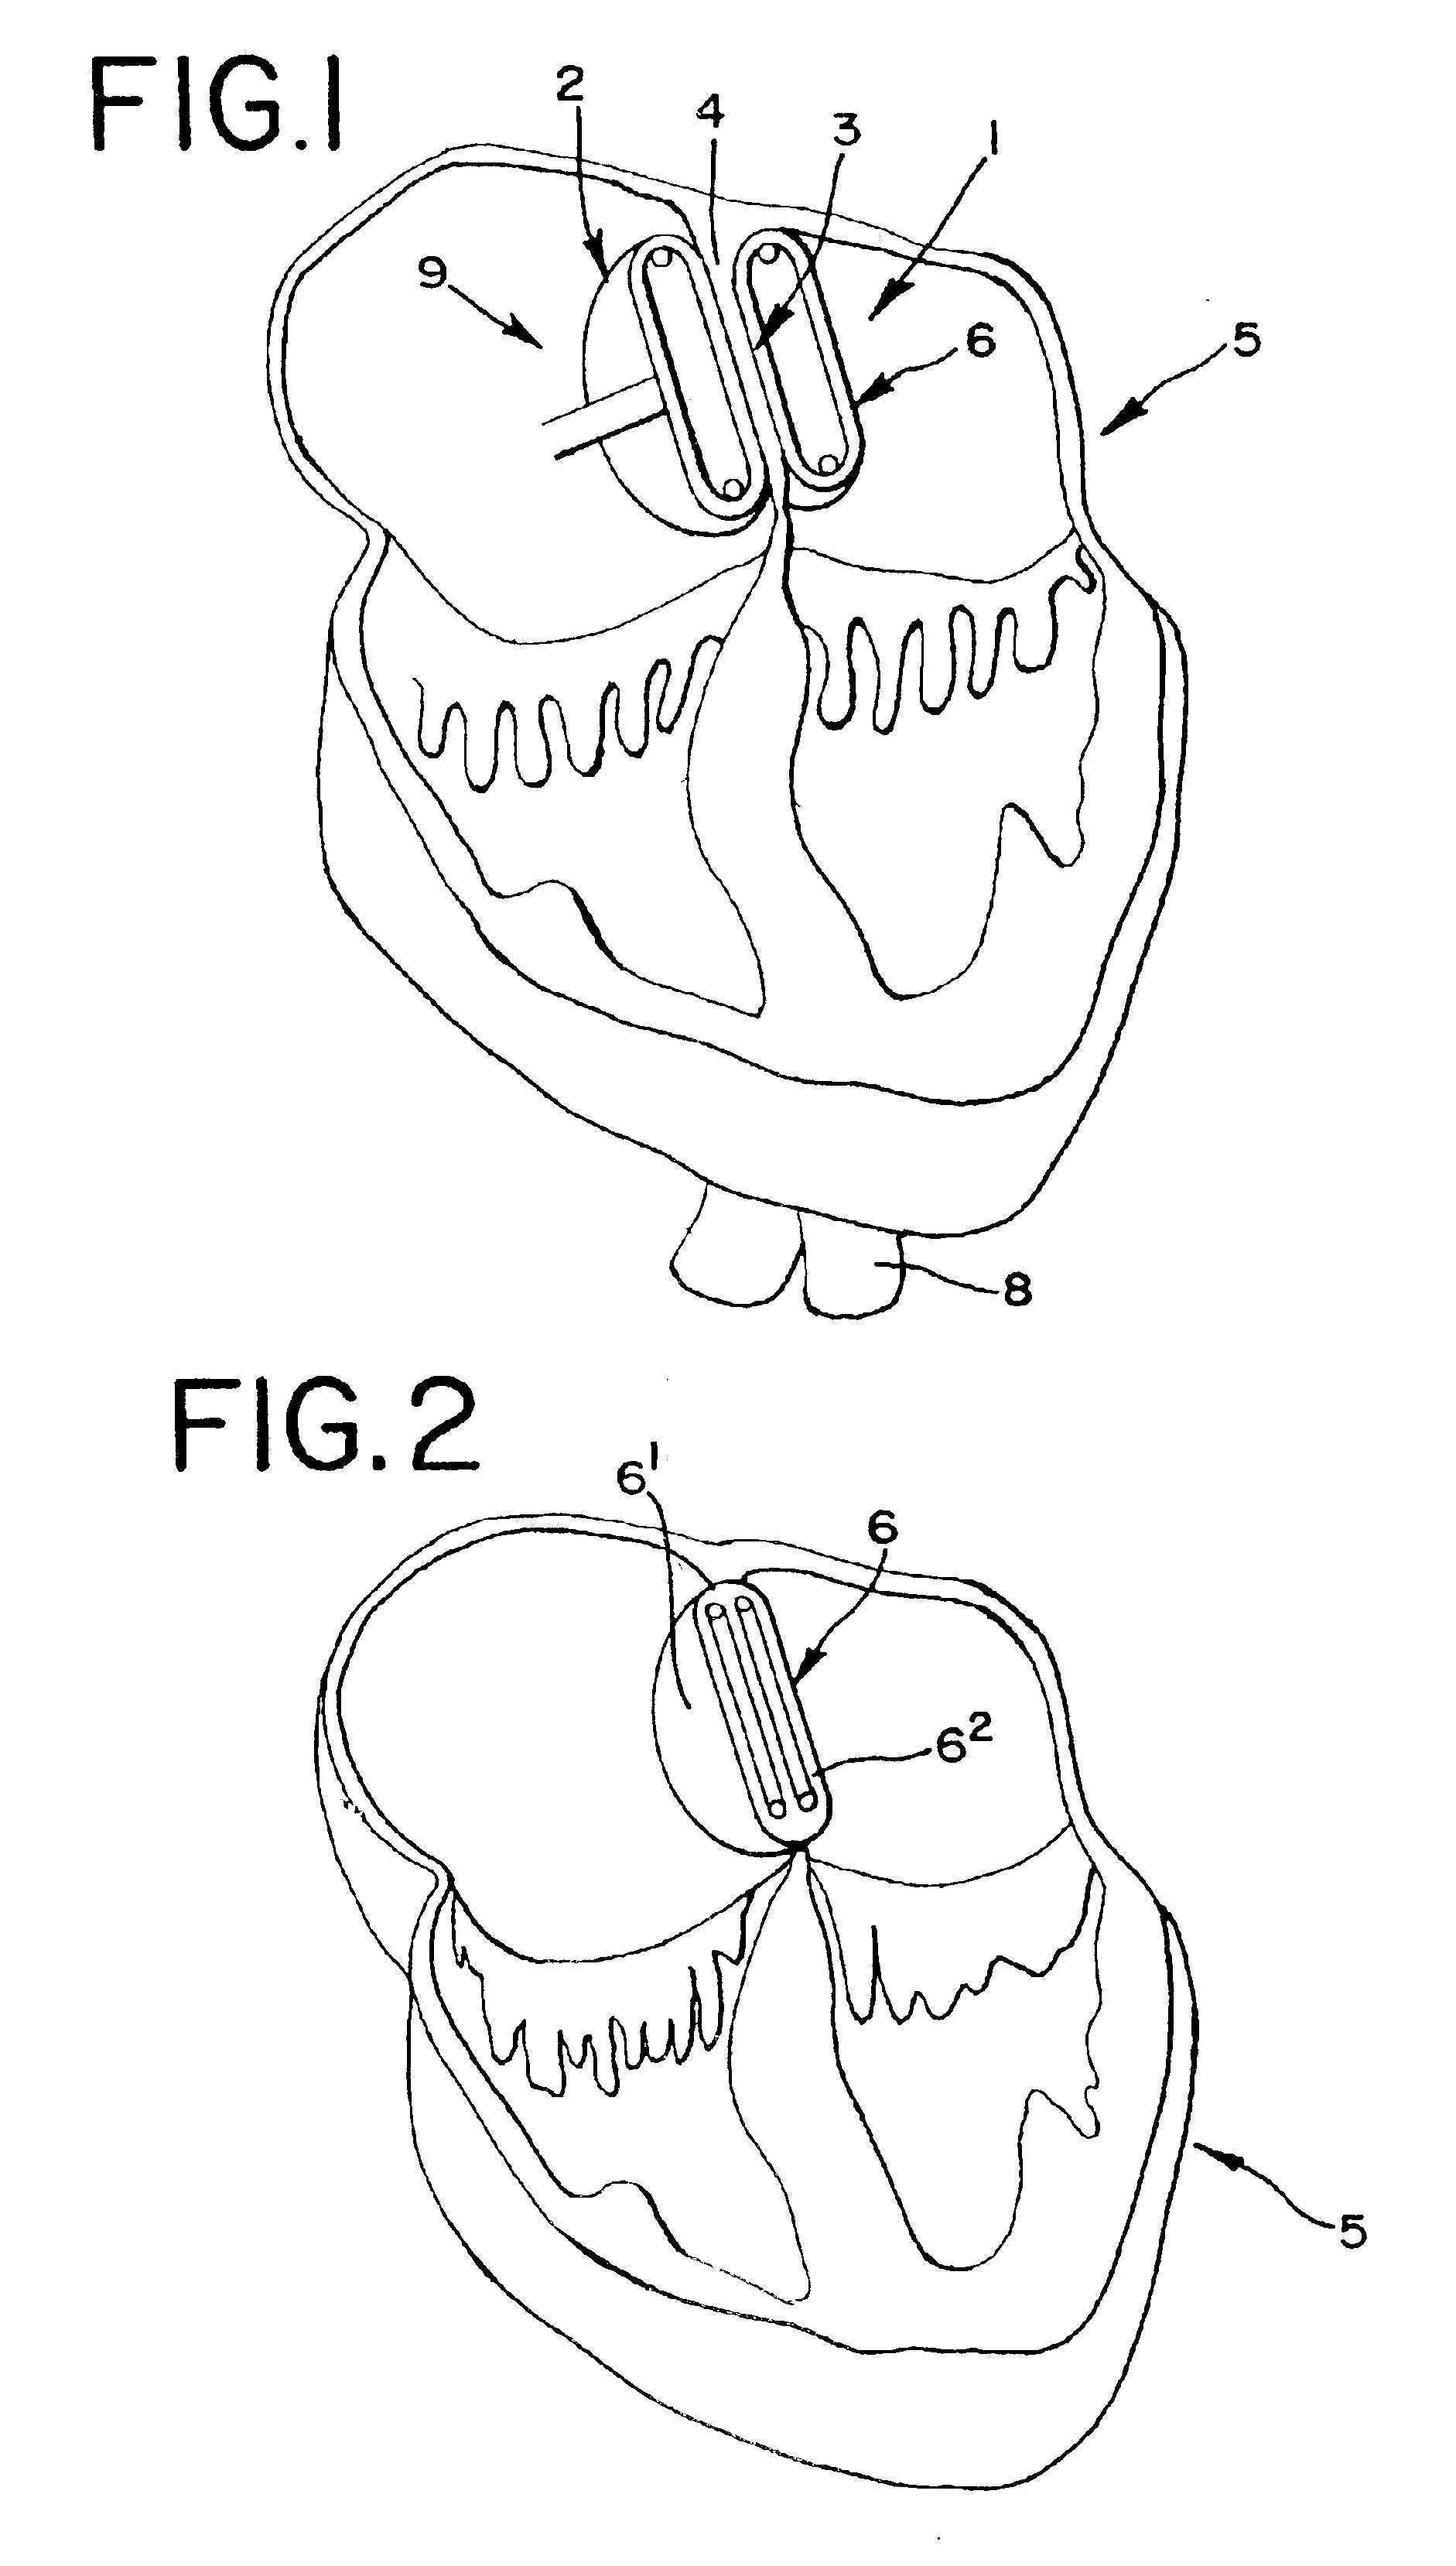 Device for plugging an opening such as in a wall of a hollow or tubular organ including biodegradable elements